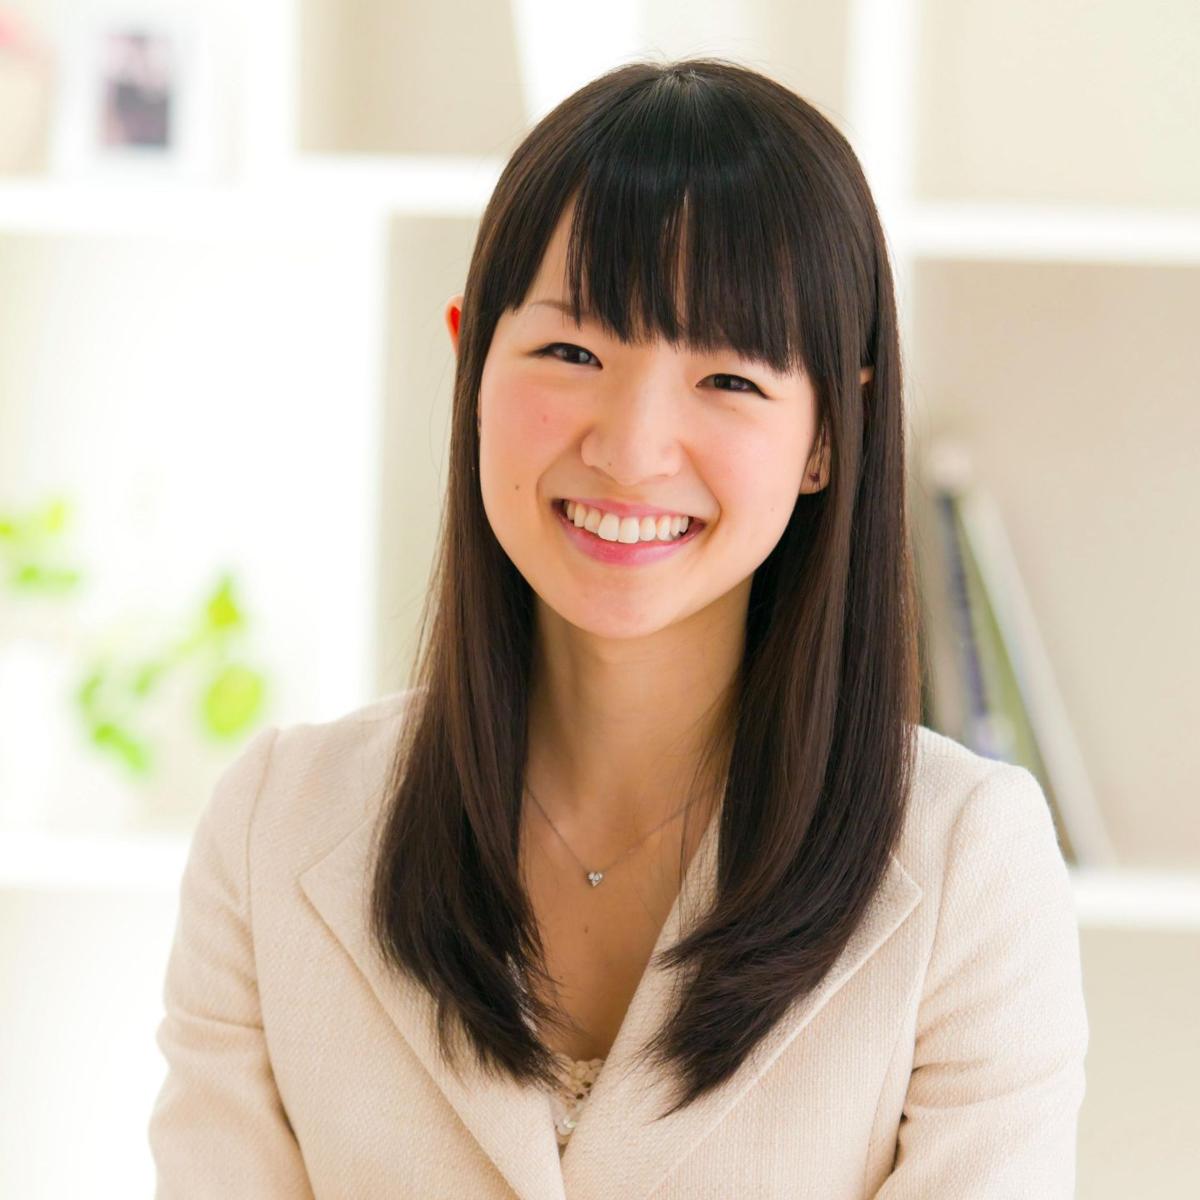 Marie Kondo is proud of your tidying up and wants to clarify that part ...